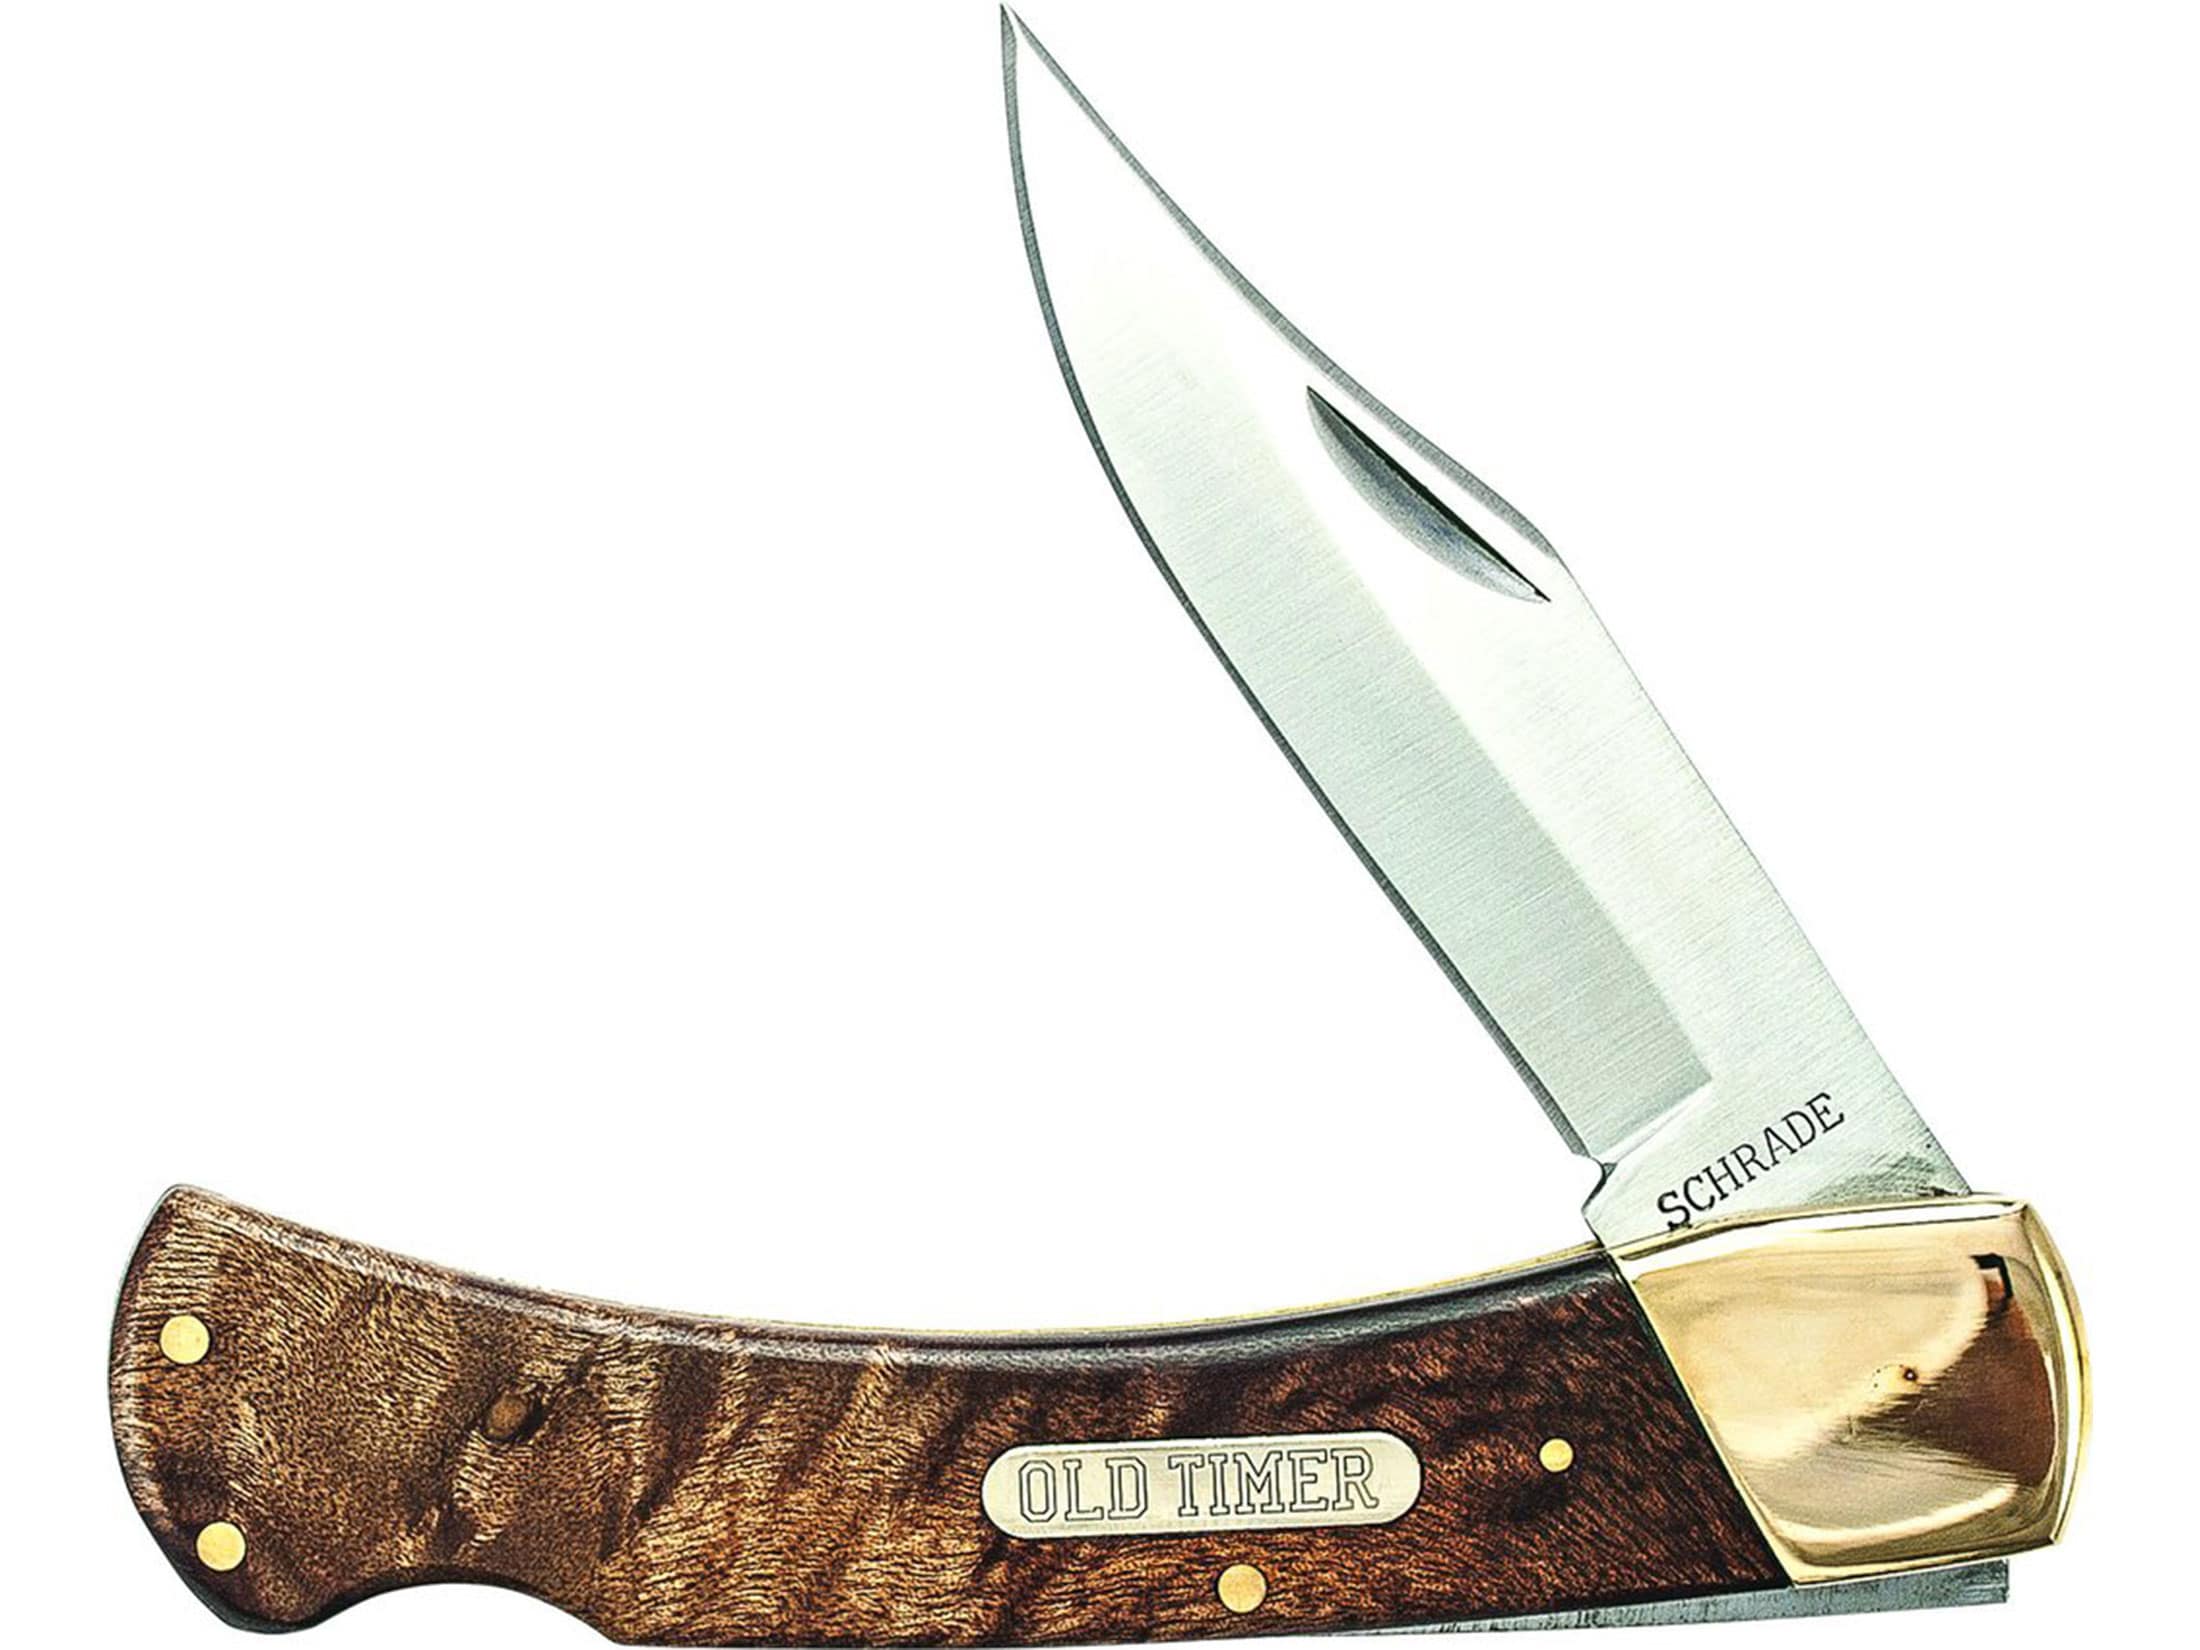 Old Timer Golden Bear Folding Knife 3.9″ Clip Point 7Cr17MoV High Carbon Stainless Steel Blade For Sale